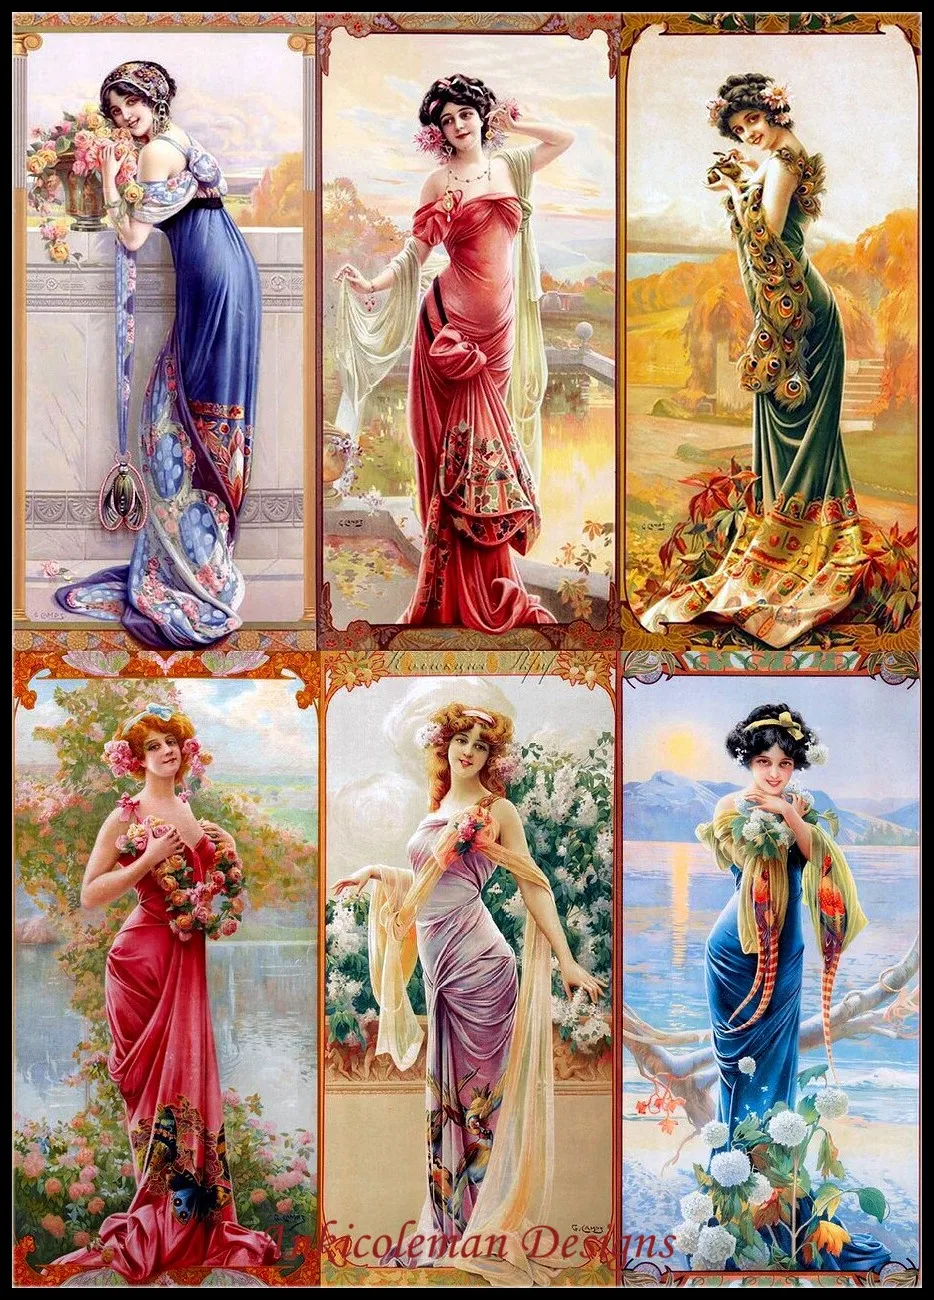 Needlework for embroidery DIY French DMC High Quality - Counted Cross Stitch Kits 14 ct Oil painting - Six Ladies